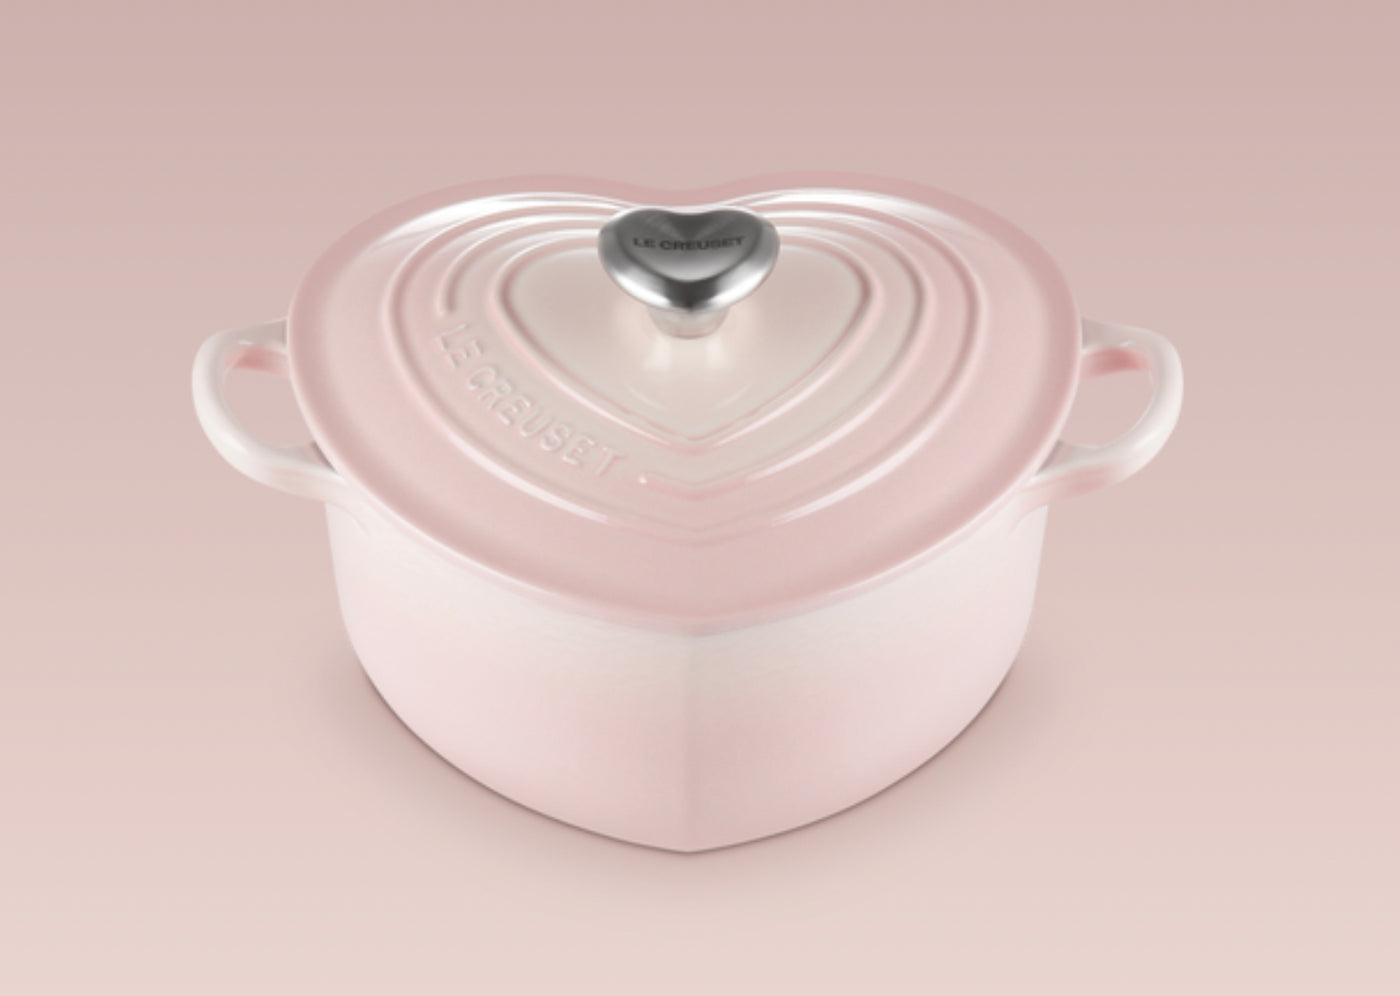 Le Creuset Heart Shaped Casserole with Heart Knob - Pink – Kooks Unlimited